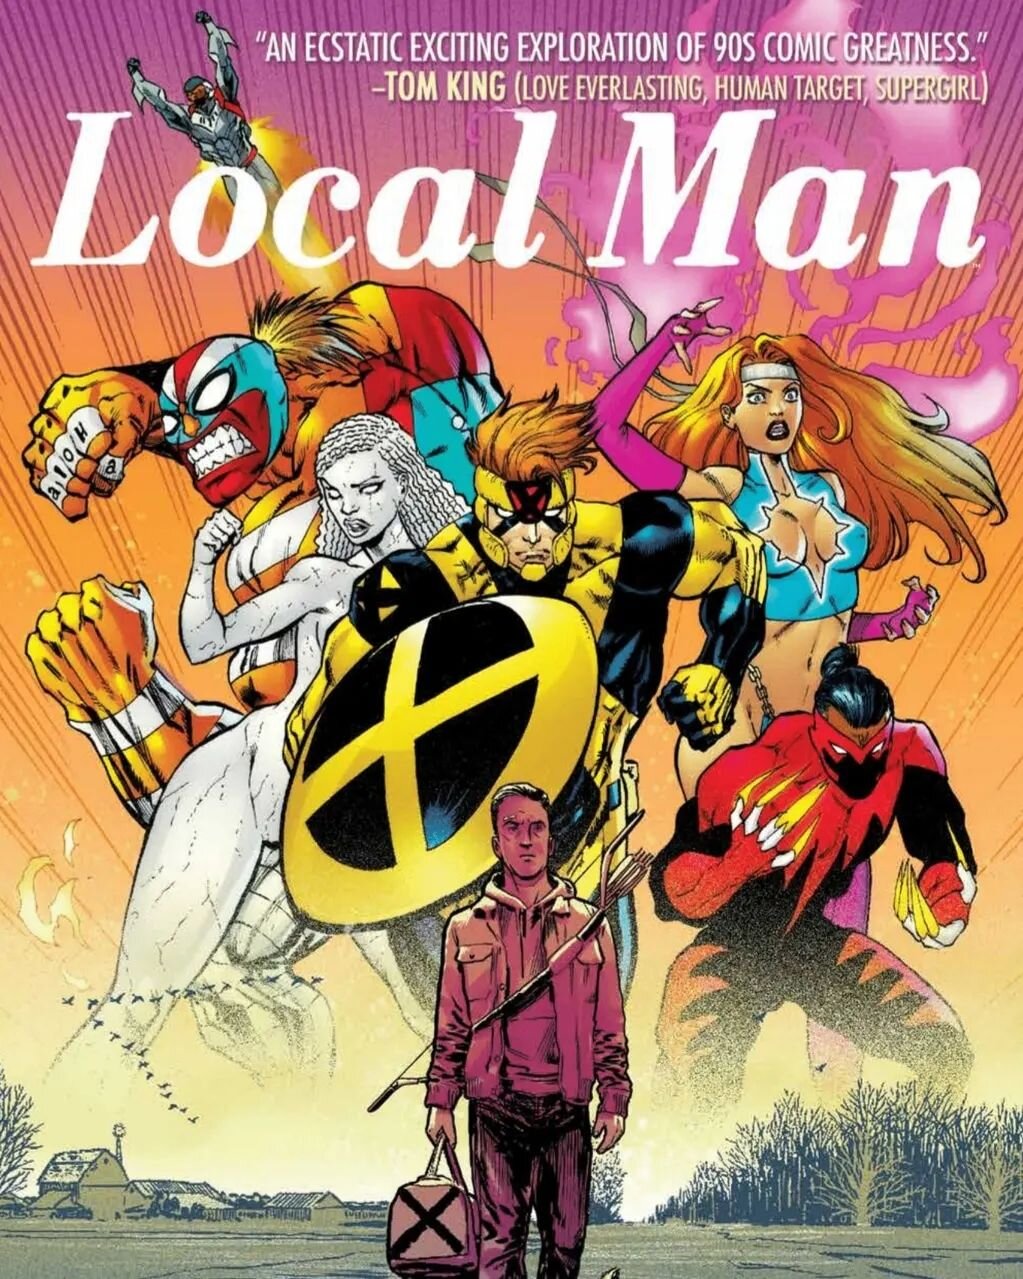 We're getting ready for our comic book release signing in just a few hours with Tim Seeley and Ryan Browne to celebrate their new comic Local Man! Come in 6-7pm for a signed copy of Local Man or one of their other works.

#comic #chicagobar #chicagod